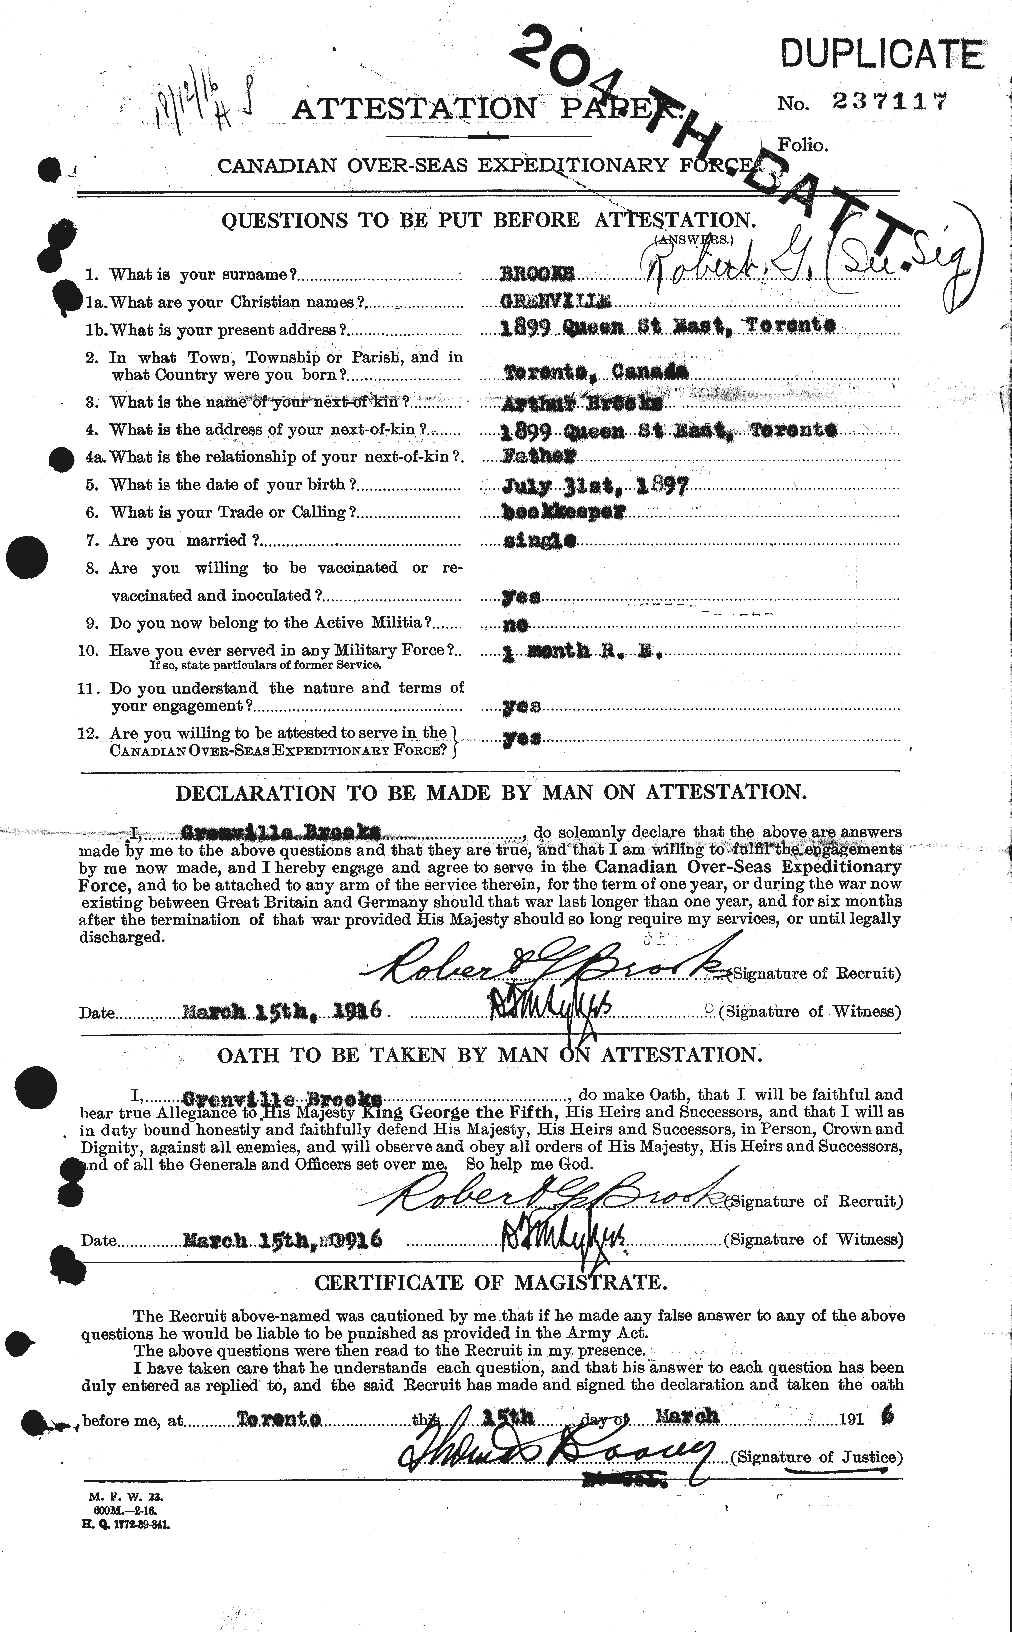 Personnel Records of the First World War - CEF 261673a